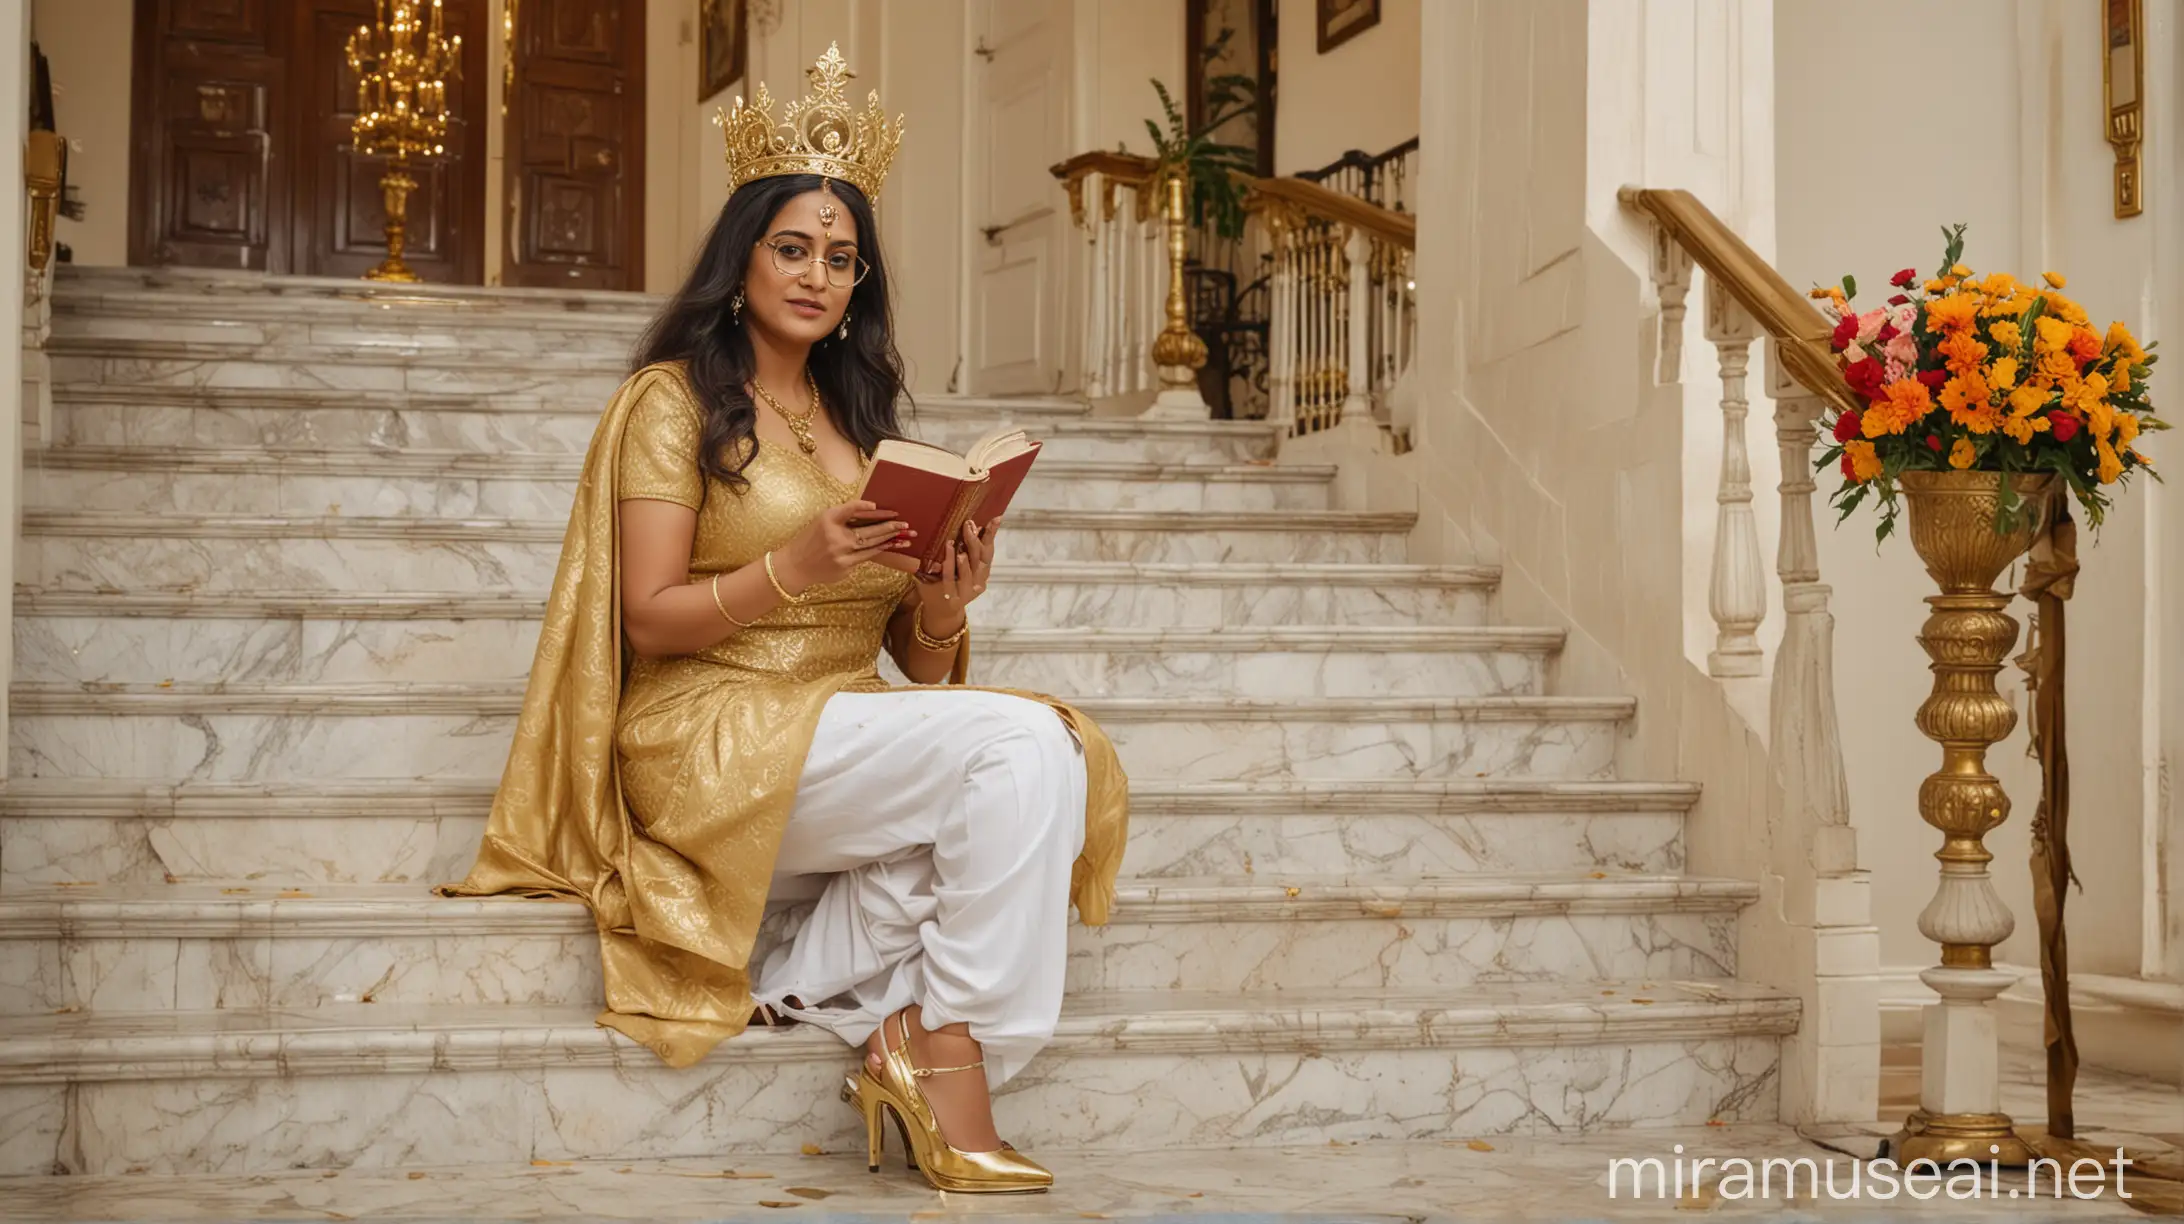 a 47 years old  fat mature  indian woman  backside , with curvy figure , long dense hair, wearing a  golden crown  on head , golden spectacles on face, wet Adult Call the Shots Nurse Costume ,  wearing a flower garland on neck , white high heels  on feet  , doing squat exercise , near a royal luxurious golden chair, holding a book and wearing a lots of gold ornaments, happy and smiling near  royal luxurious marble stairs , its evening time and a lots of peacocks  are there and lights are there 